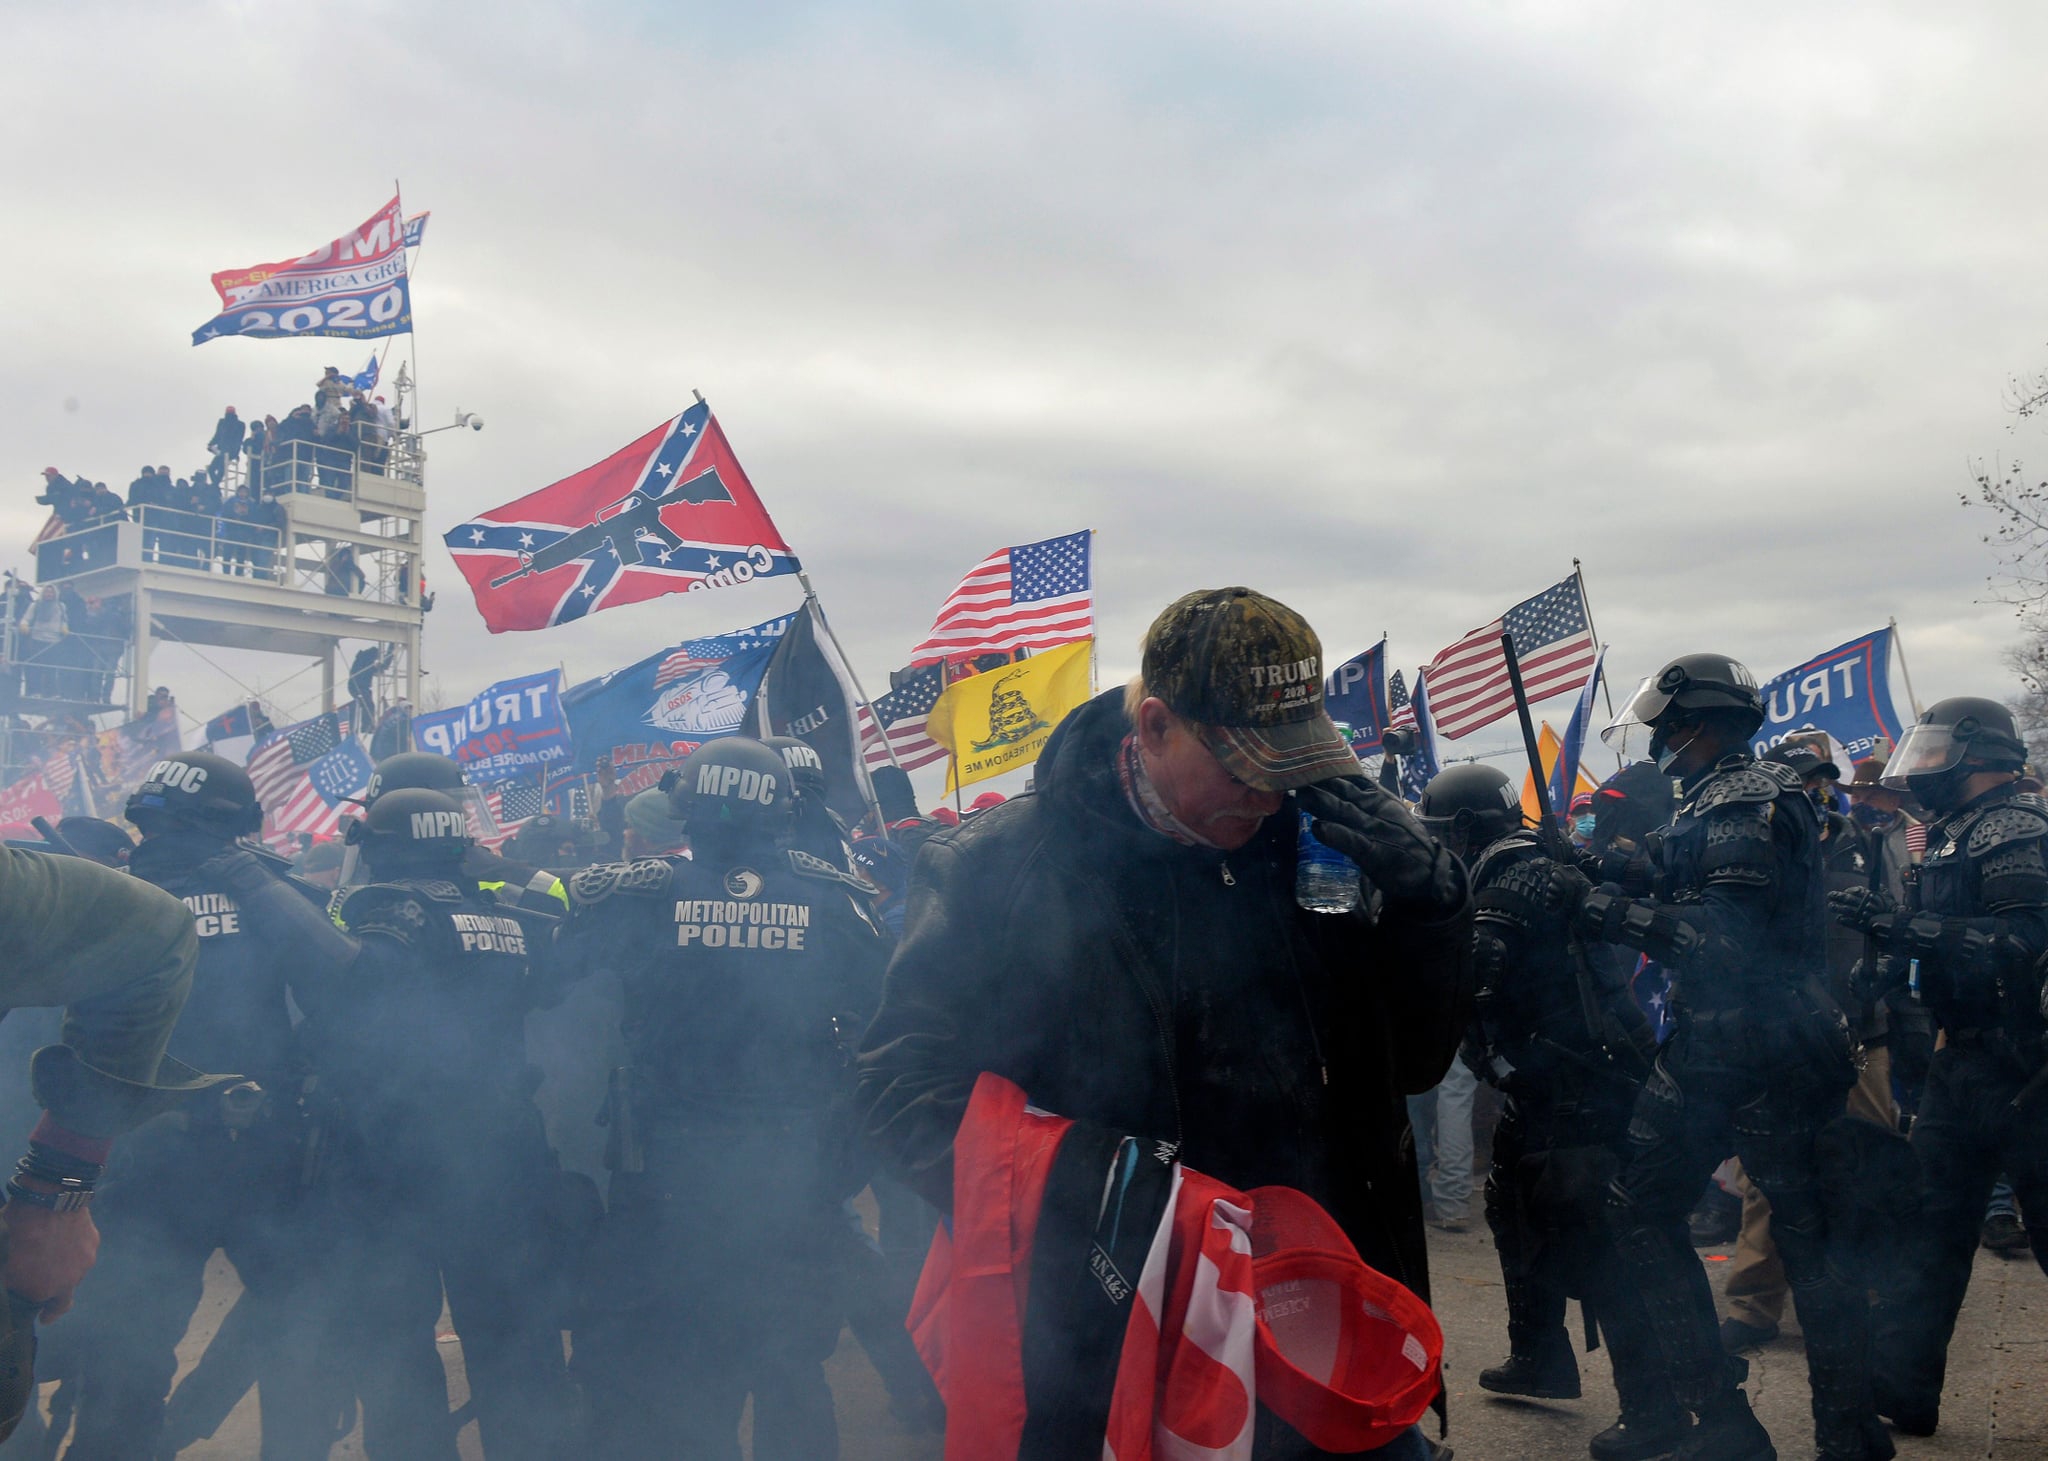 Trump supporters clash with police and security forces as people try to storm the US Capitol Building in Washington, DC, on January 6, 2021. - Demonstrators breeched security and entered the Capitol as Congress debated the a 2020 presidential election Electoral Vote Certification. (Photo by Joseph Prezioso / AFP) (Photo by JOSEPH PREZIOSO/AFP via Getty Images)